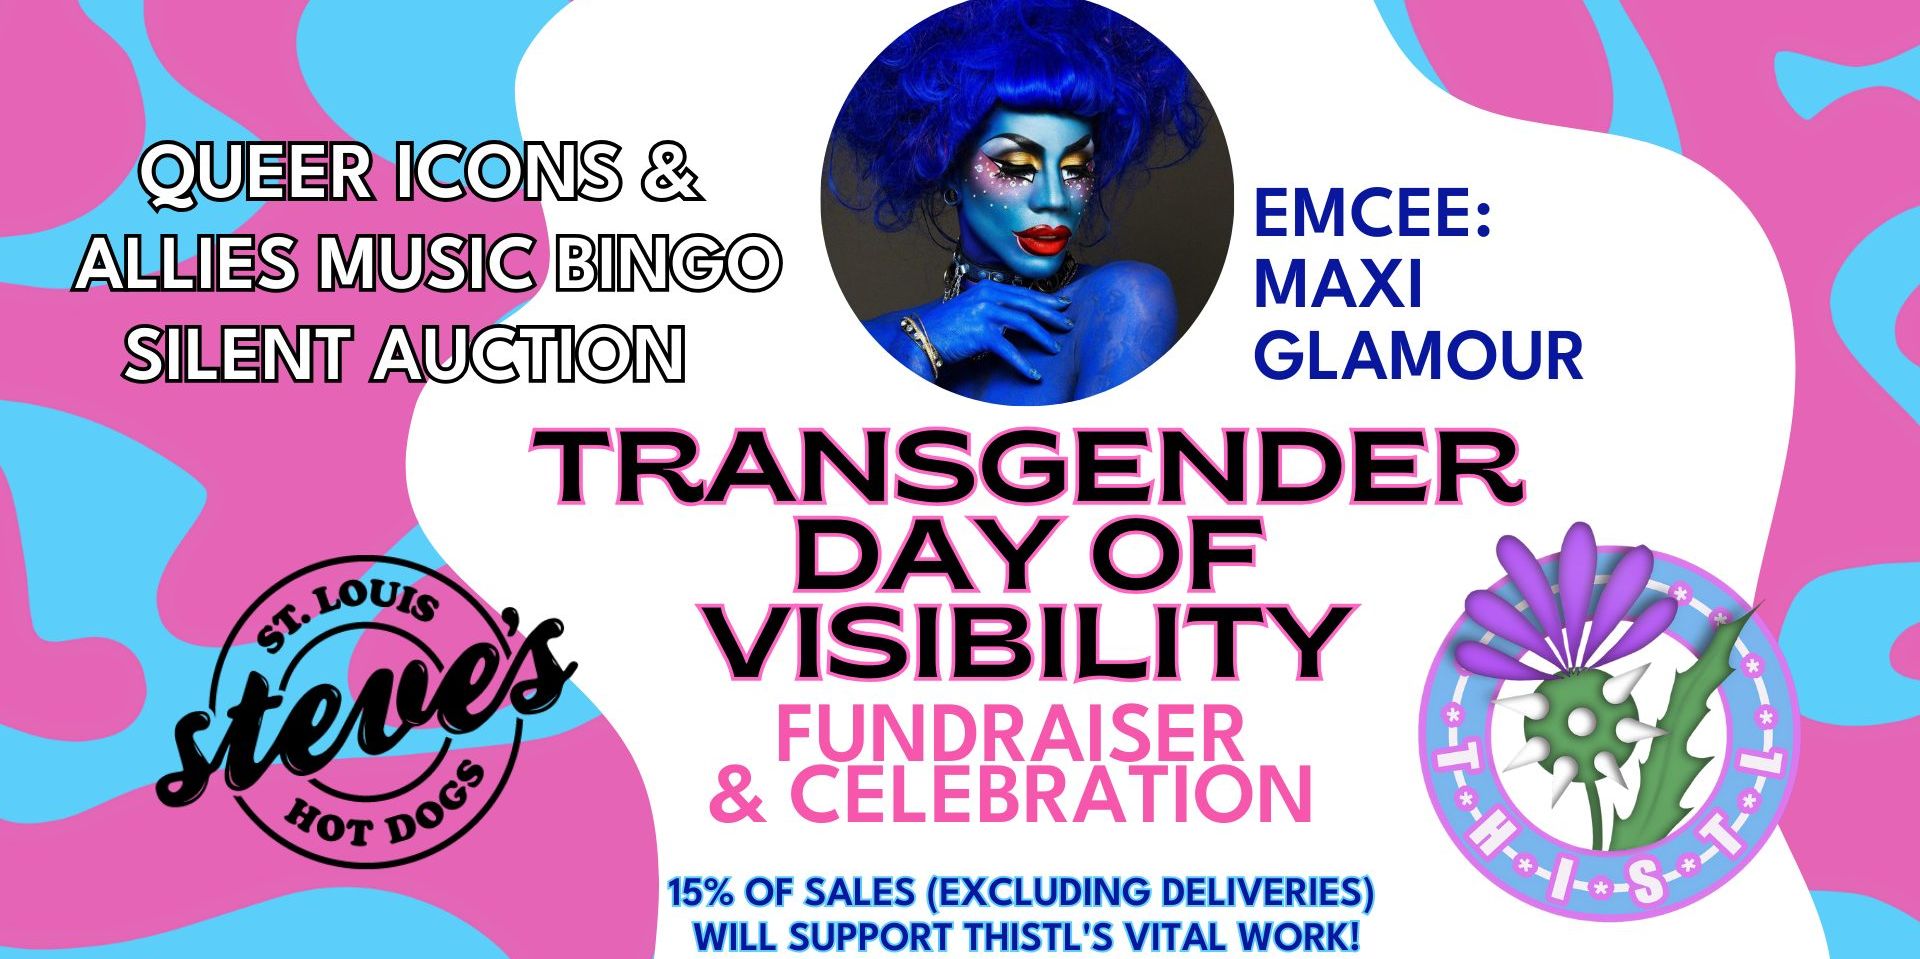 Queer Icons & Allies Music Bingo & Fundraiser for Transgender Day of Visibility promotional image